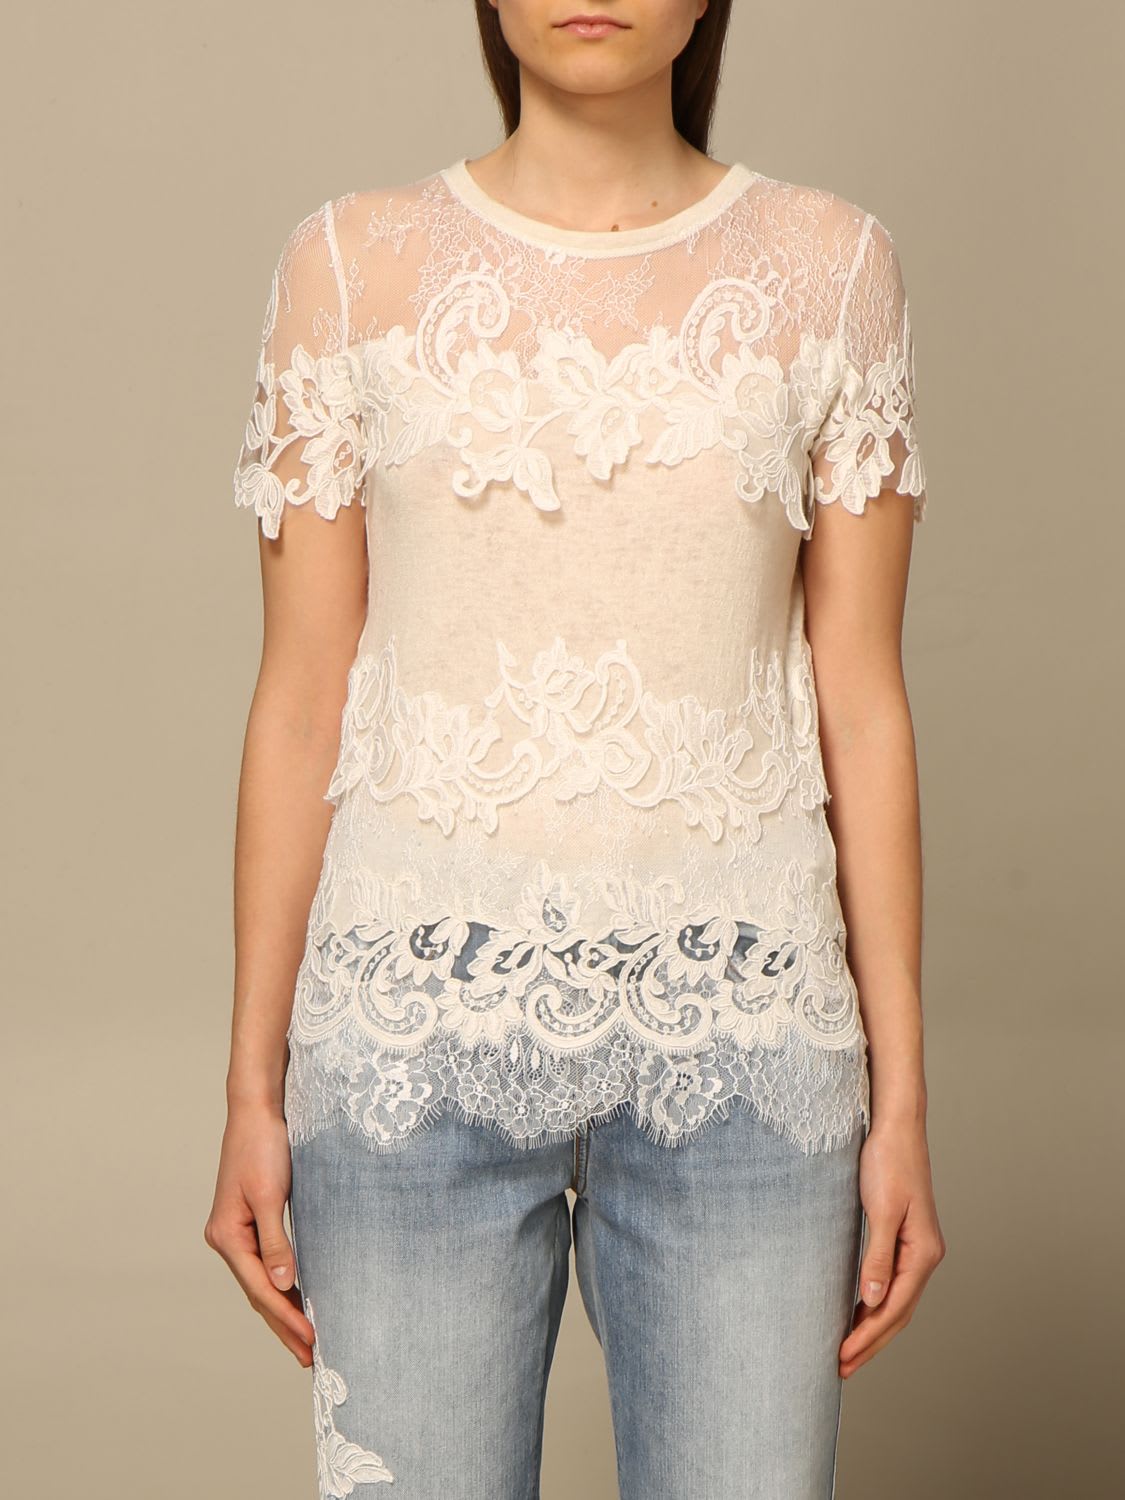 ERMANNO SCERVINO COTTON SWEATER WITH FLORAL EMBROIDERY,D382L719FBF 10104